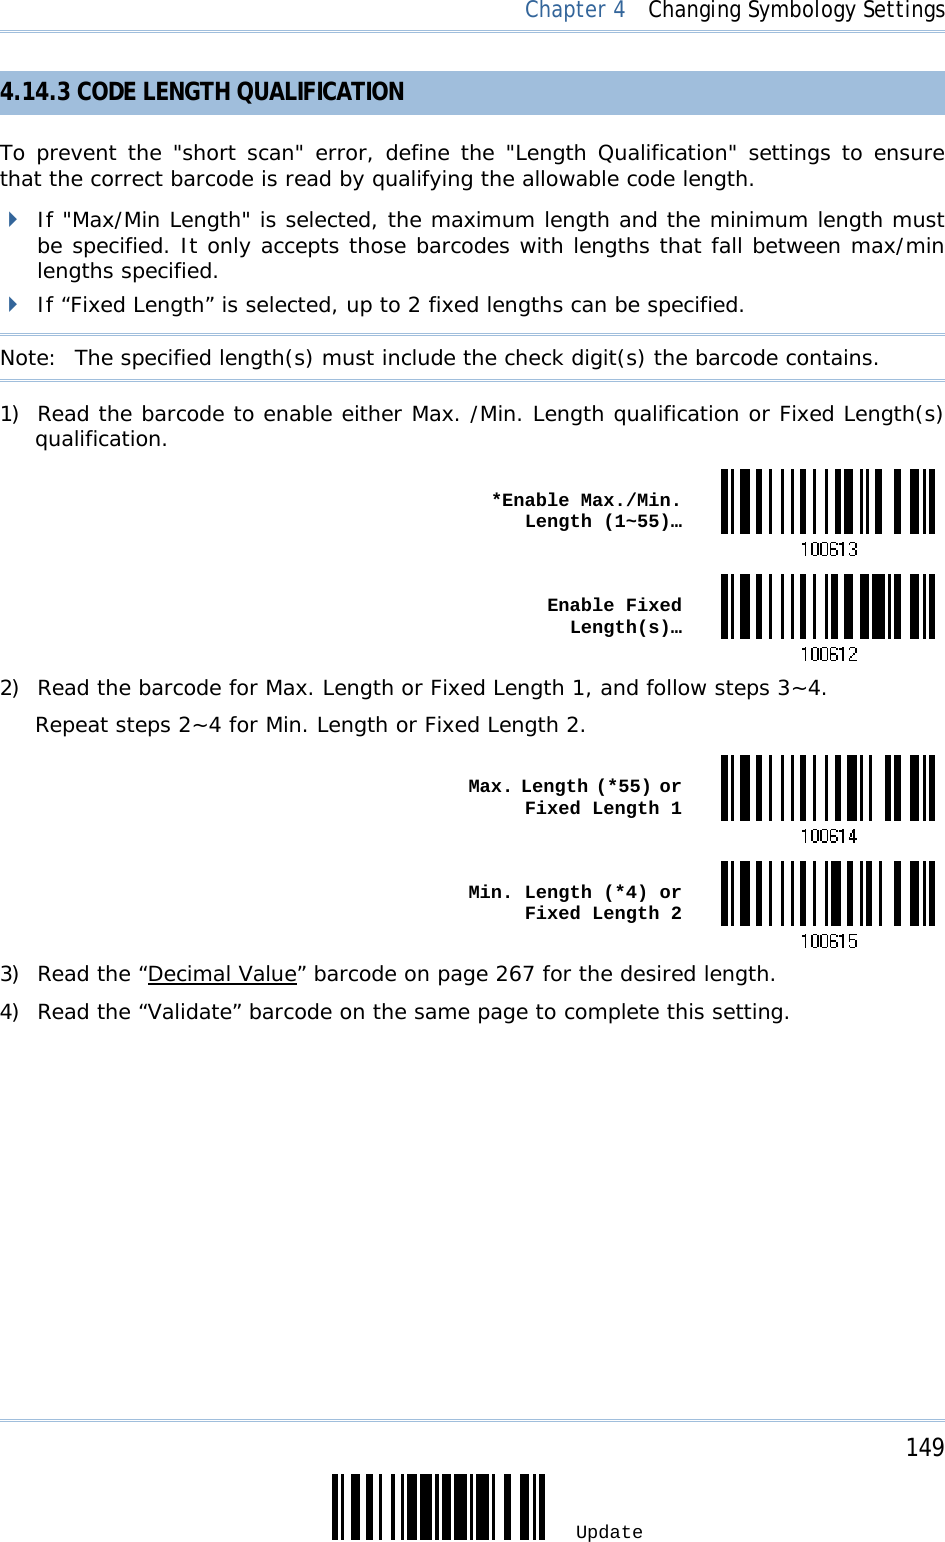     149 Update  Chapter 4  Changing Symbology Settings 4.14.3 CODE LENGTH QUALIFICATION To prevent the &quot;short scan&quot; error, define the &quot;Length Qualification&quot; settings to ensure that the correct barcode is read by qualifying the allowable code length.   If &quot;Max/Min Length&quot; is selected, the maximum length and the minimum length must be specified. It only accepts those barcodes with lengths that fall between max/min lengths specified.  If “Fixed Length” is selected, up to 2 fixed lengths can be specified. Note:   The specified length(s) must include the check digit(s) the barcode contains. 1) Read the barcode to enable either Max. /Min. Length qualification or Fixed Length(s) qualification.  *Enable Max./Min. Length (1~55)… Enable Fixed Length(s)…2) Read the barcode for Max. Length or Fixed Length 1, and follow steps 3~4. Repeat steps 2~4 for Min. Length or Fixed Length 2.  Max. Length (*55) or Fixed Length 1 Min. Length (*4) or Fixed Length 23) Read the “Decimal Value” barcode on page 267 for the desired length.  4) Read the “Validate” barcode on the same page to complete this setting. 